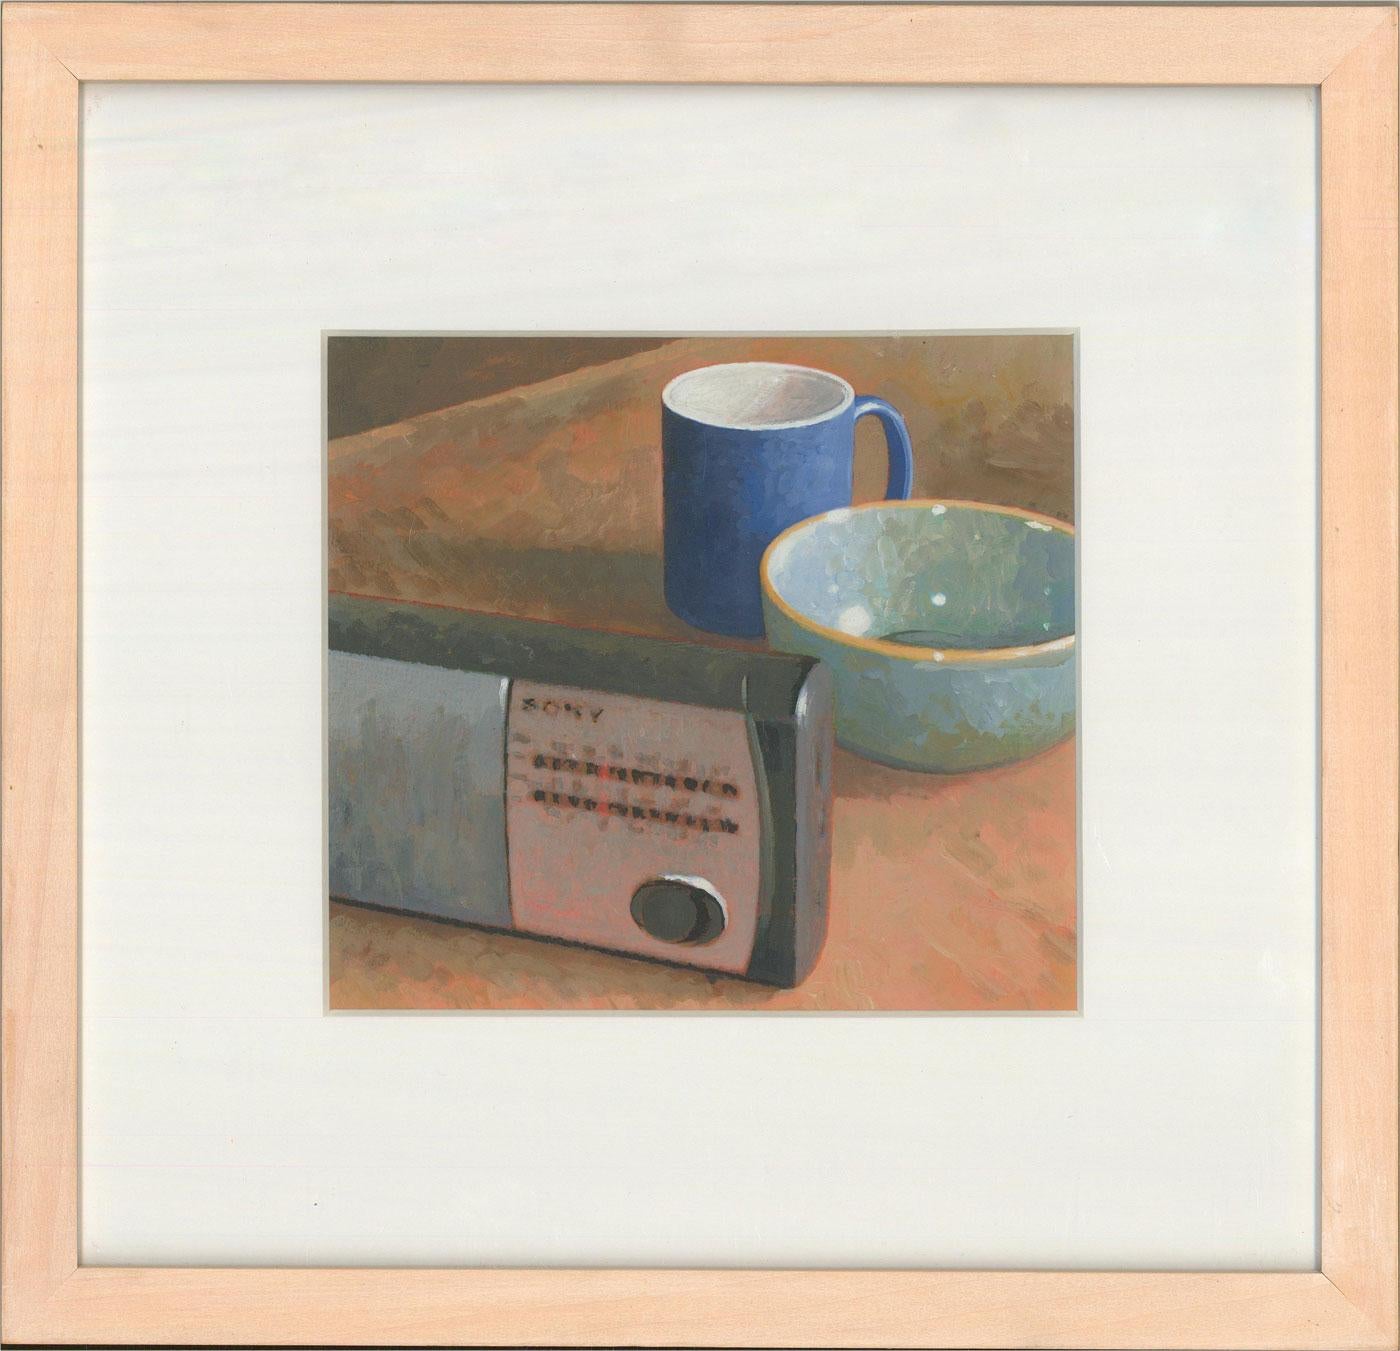 A crisp still life in acrylic in accomplished photo realistic style, showing a simple collection of objects; a radio, mug and pottery bowl. The painting has been presented in a pale oak frame with card mount. The artist has signed on a label to the